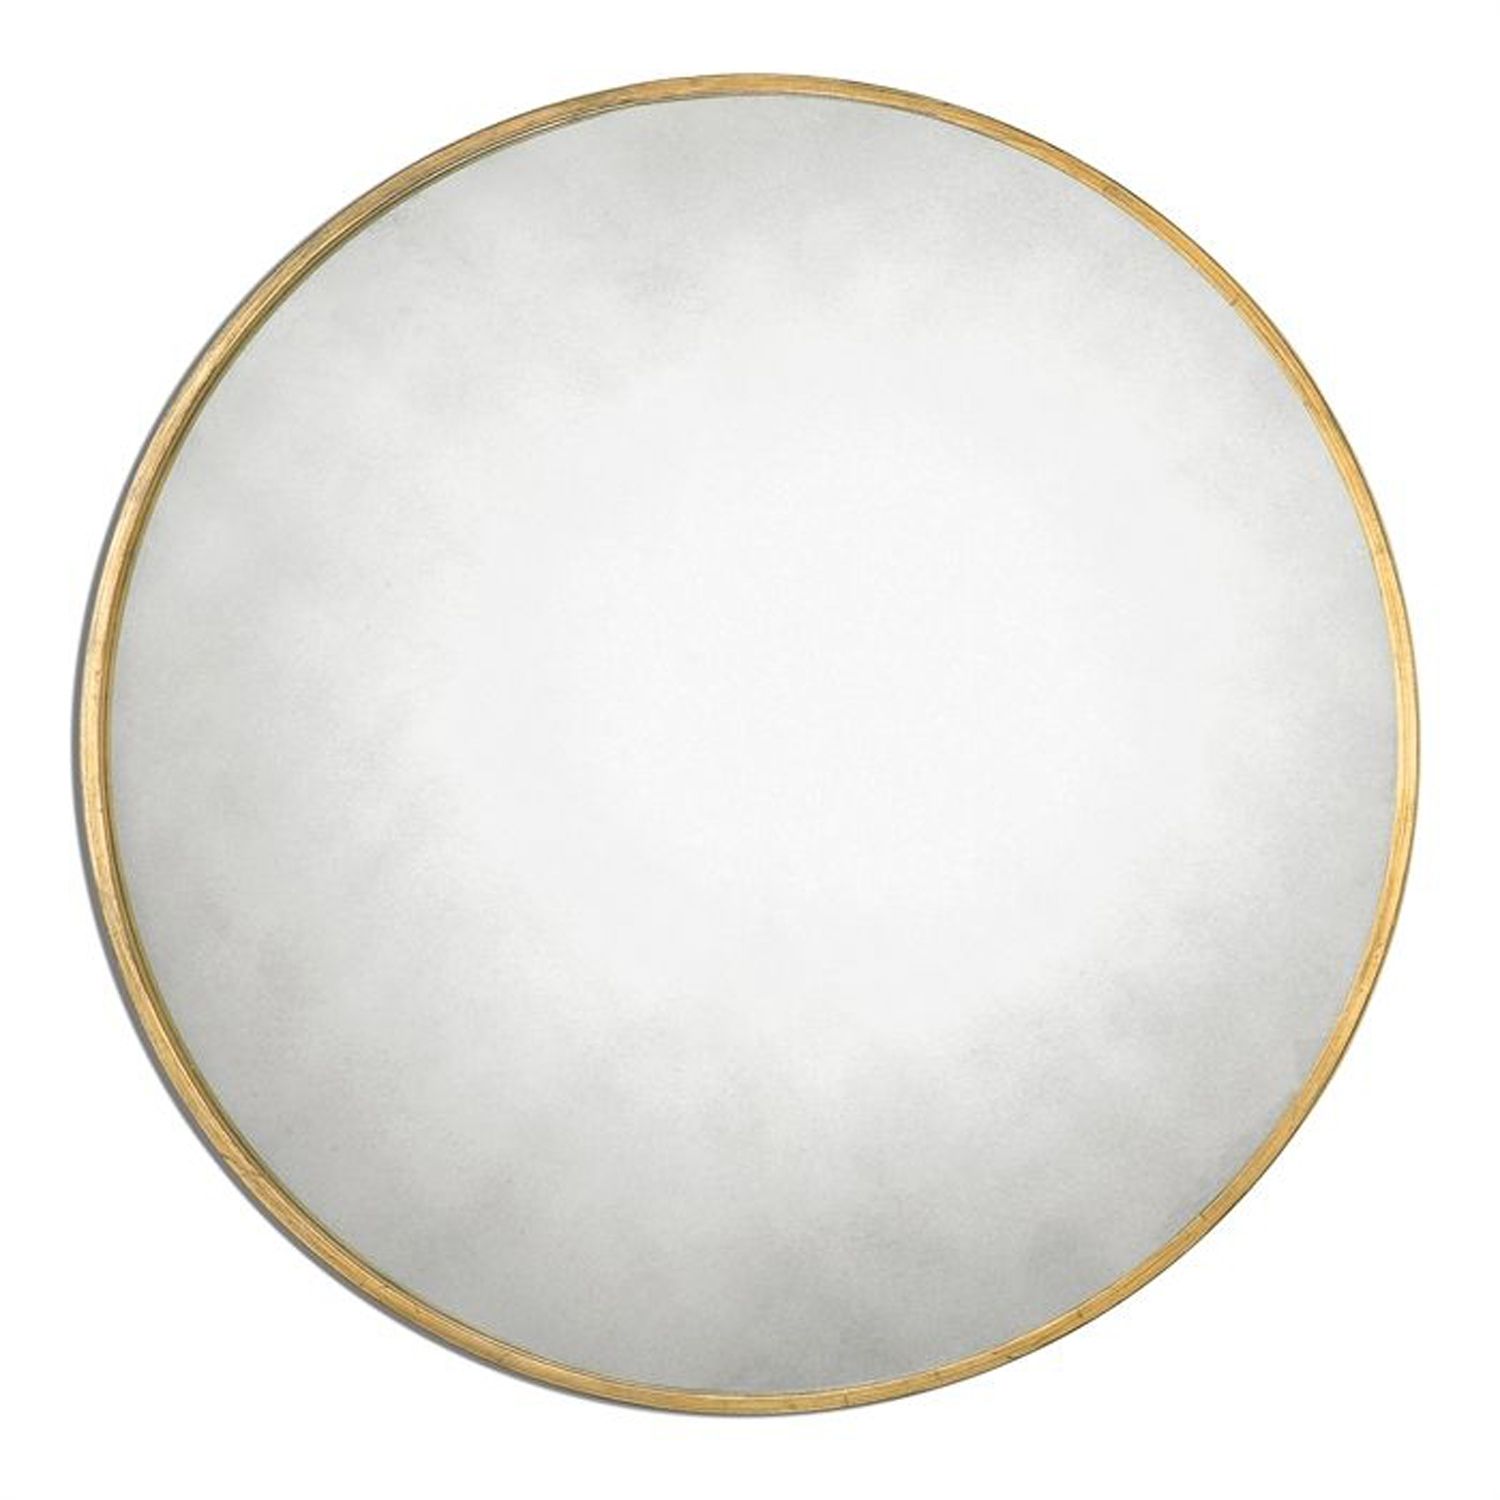 Unique Large Round Mirror 17 For With Large Round Mirror Kitchen Intended For Large Round Metal Mirror (View 6 of 15)